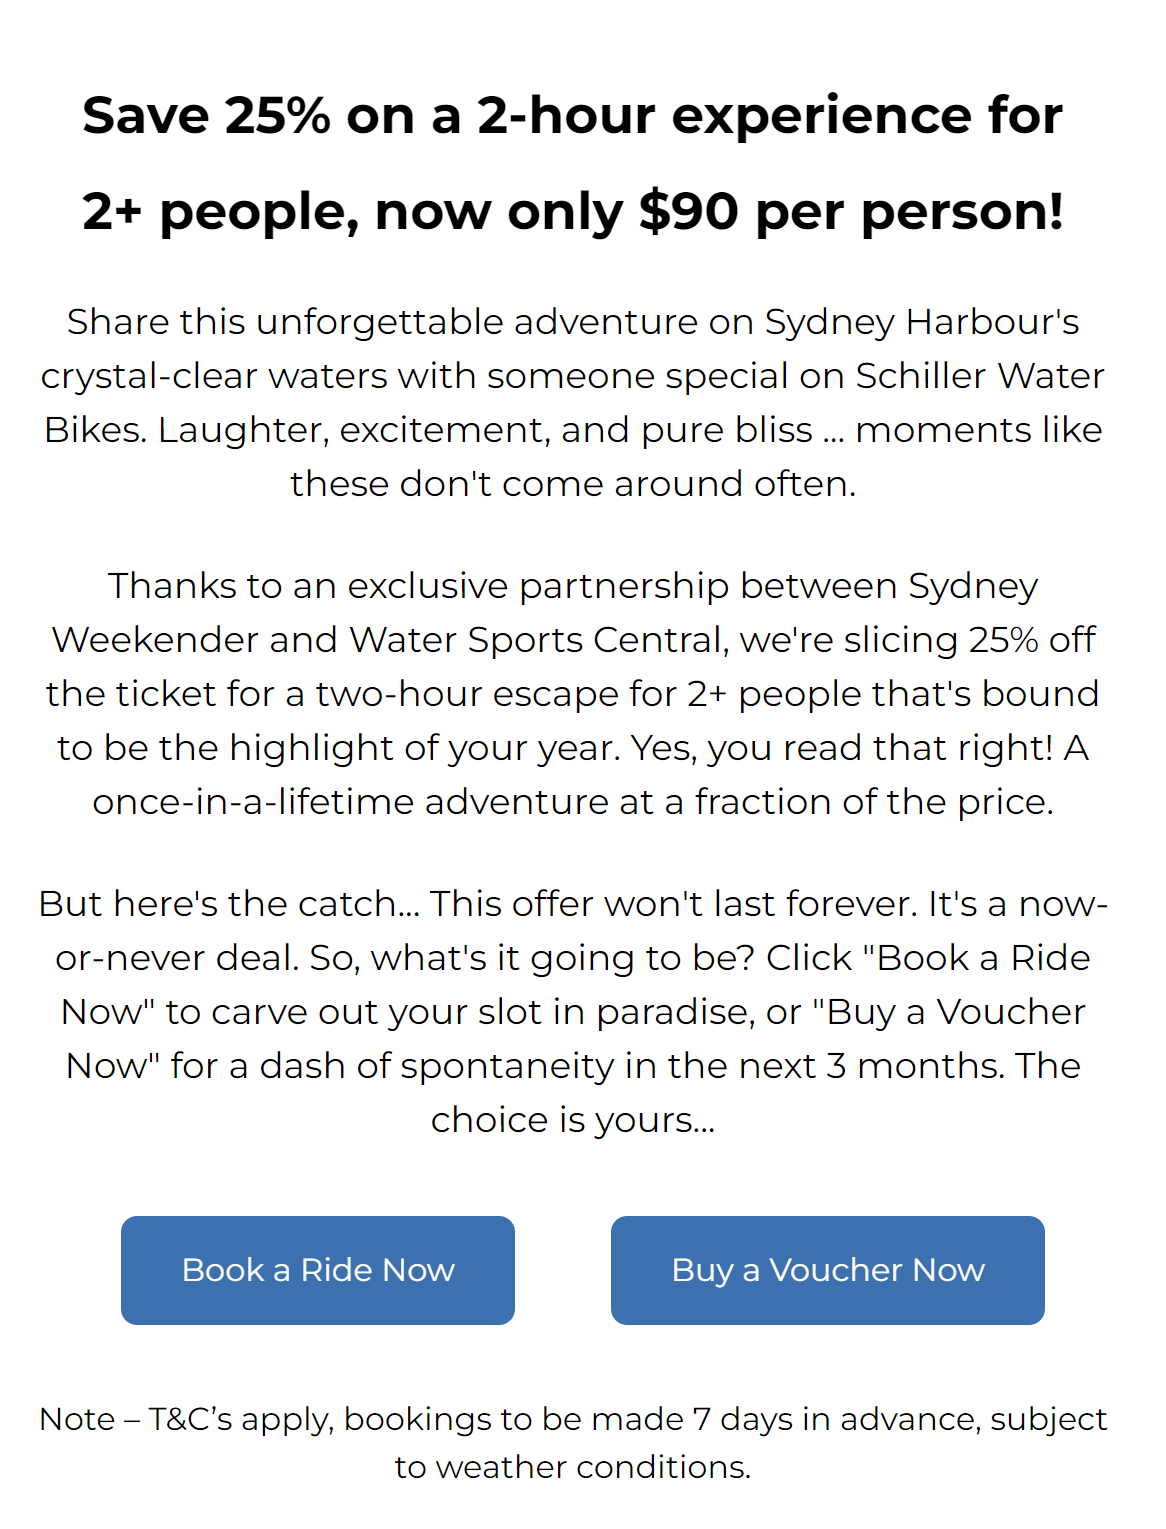 Sydney Weekender Shiller Water Bike Special Deal by Water Sports Central